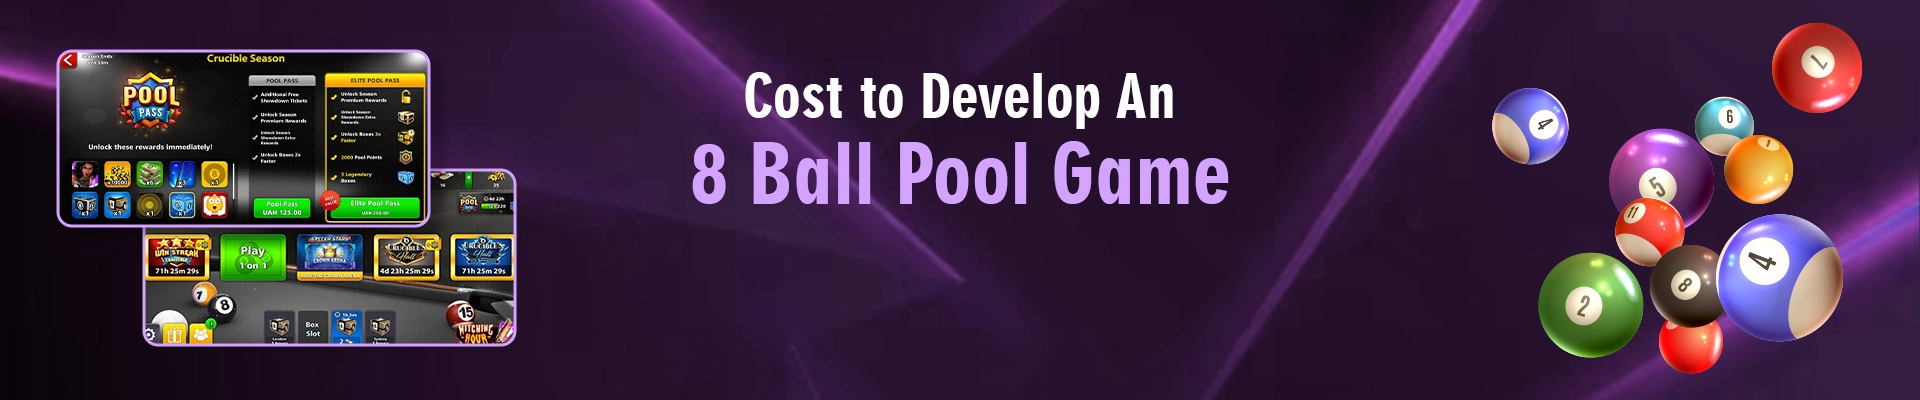 Cost to Develop an 8 Ball Pool Game